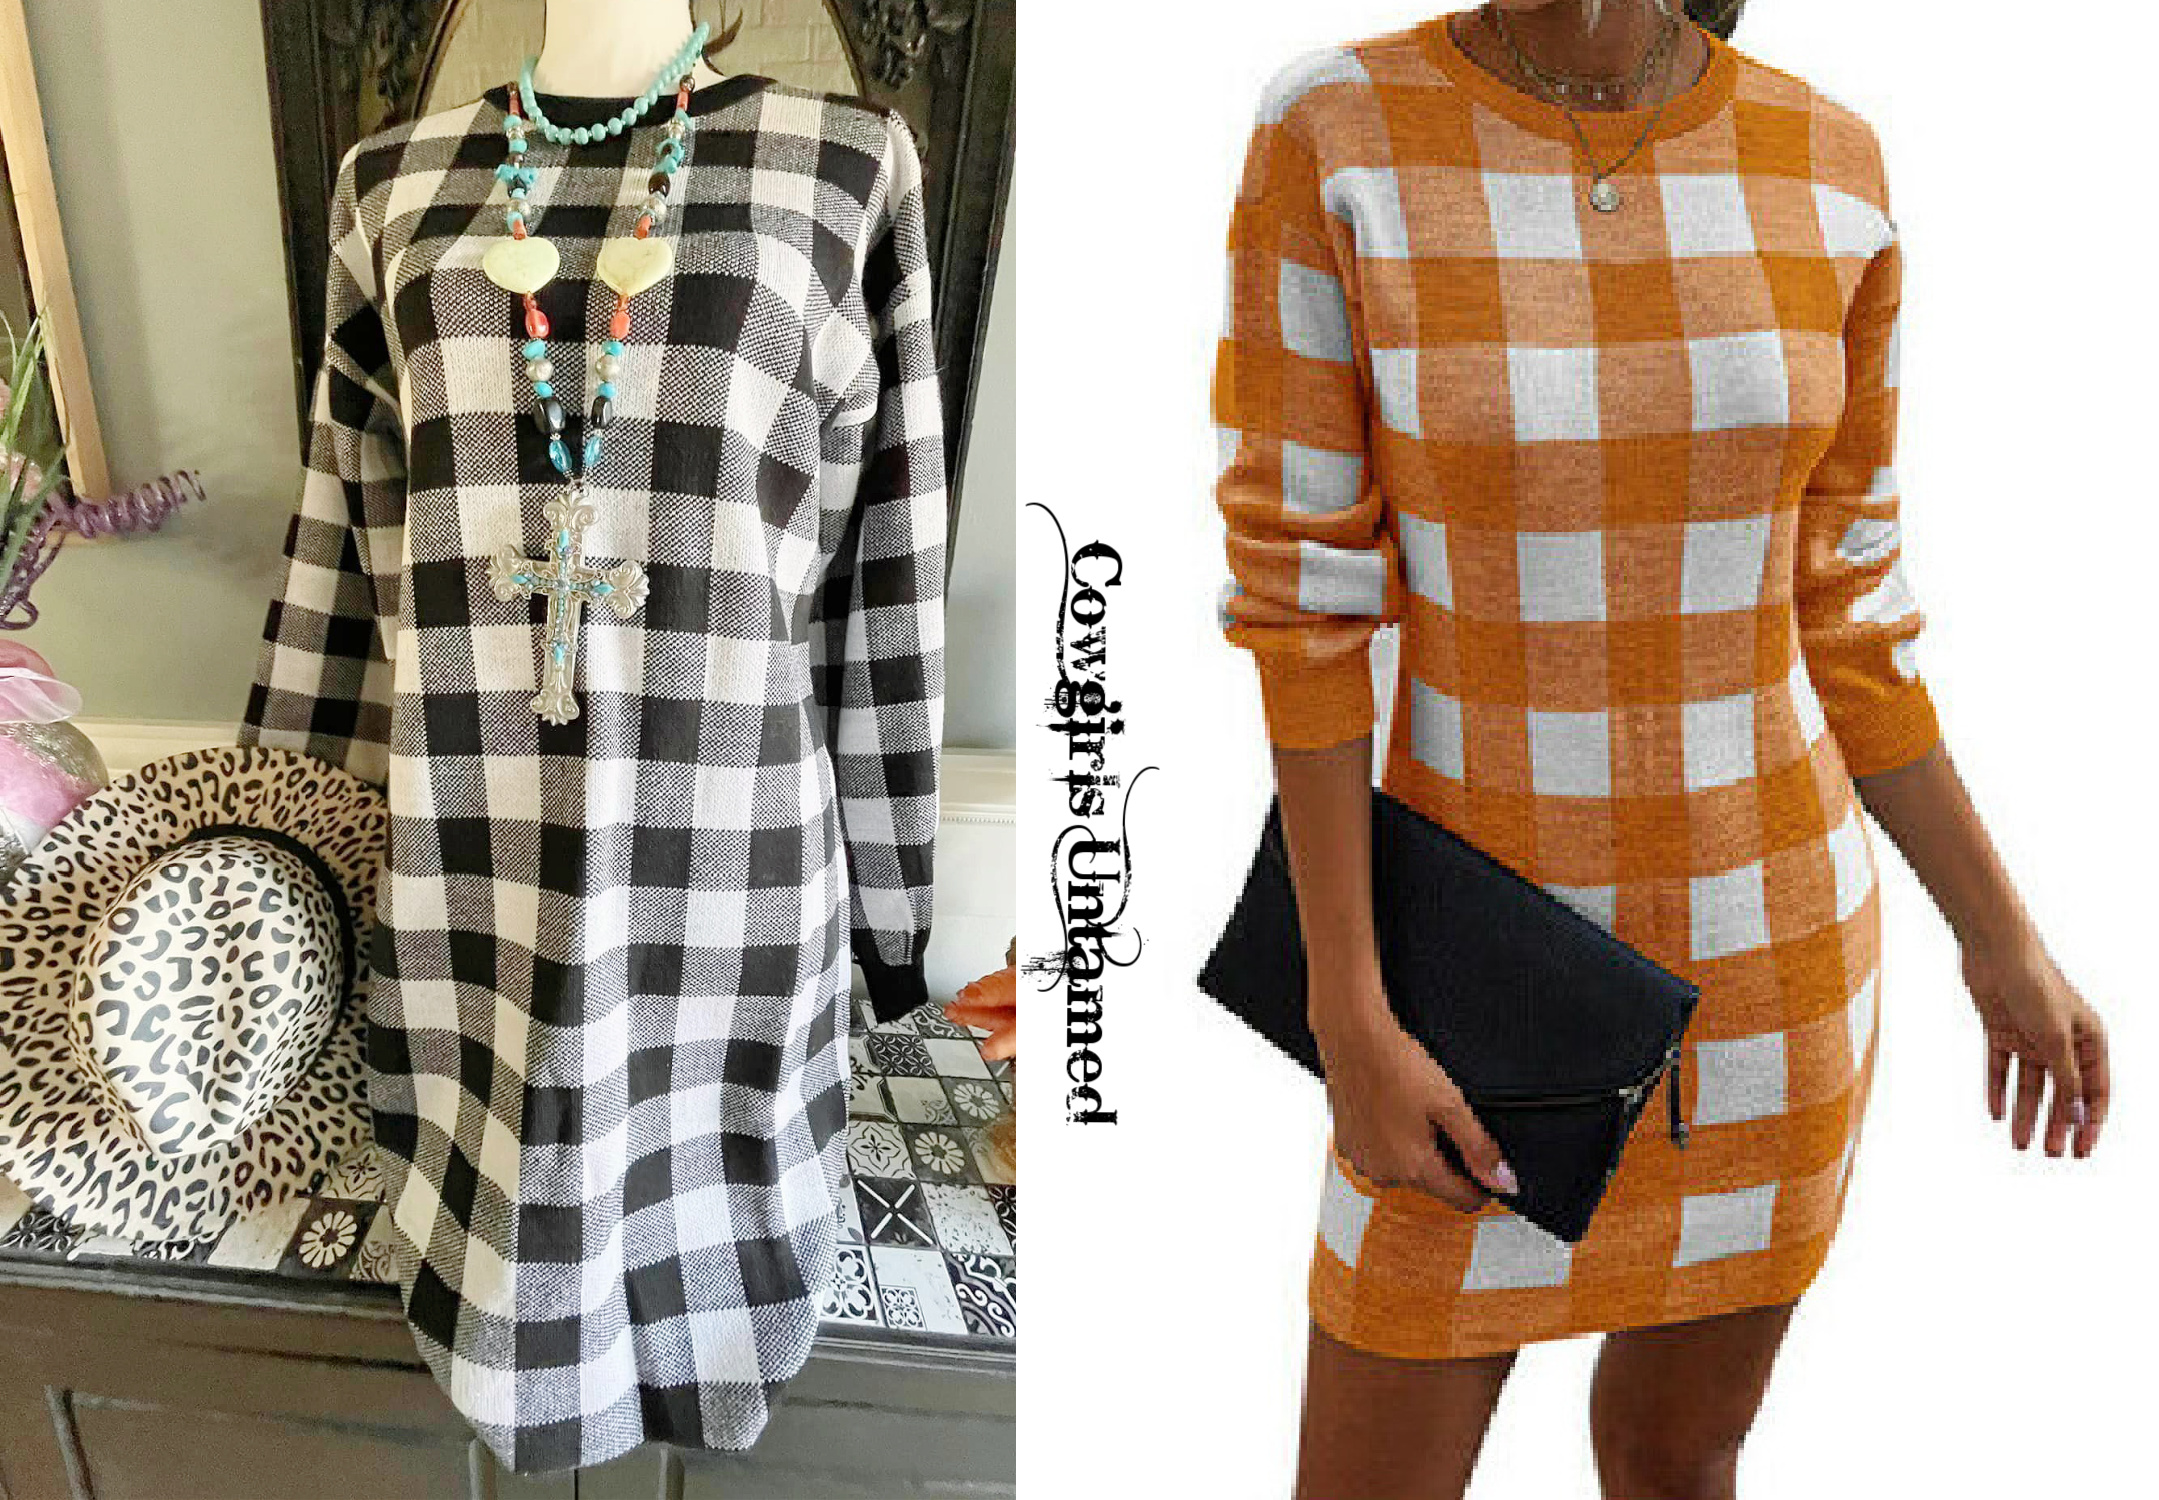 JUST CHECK DRESS Plaid Checked Womens Long Sleeve Crew Neck Sweater Dress 2 COLORS S-XL